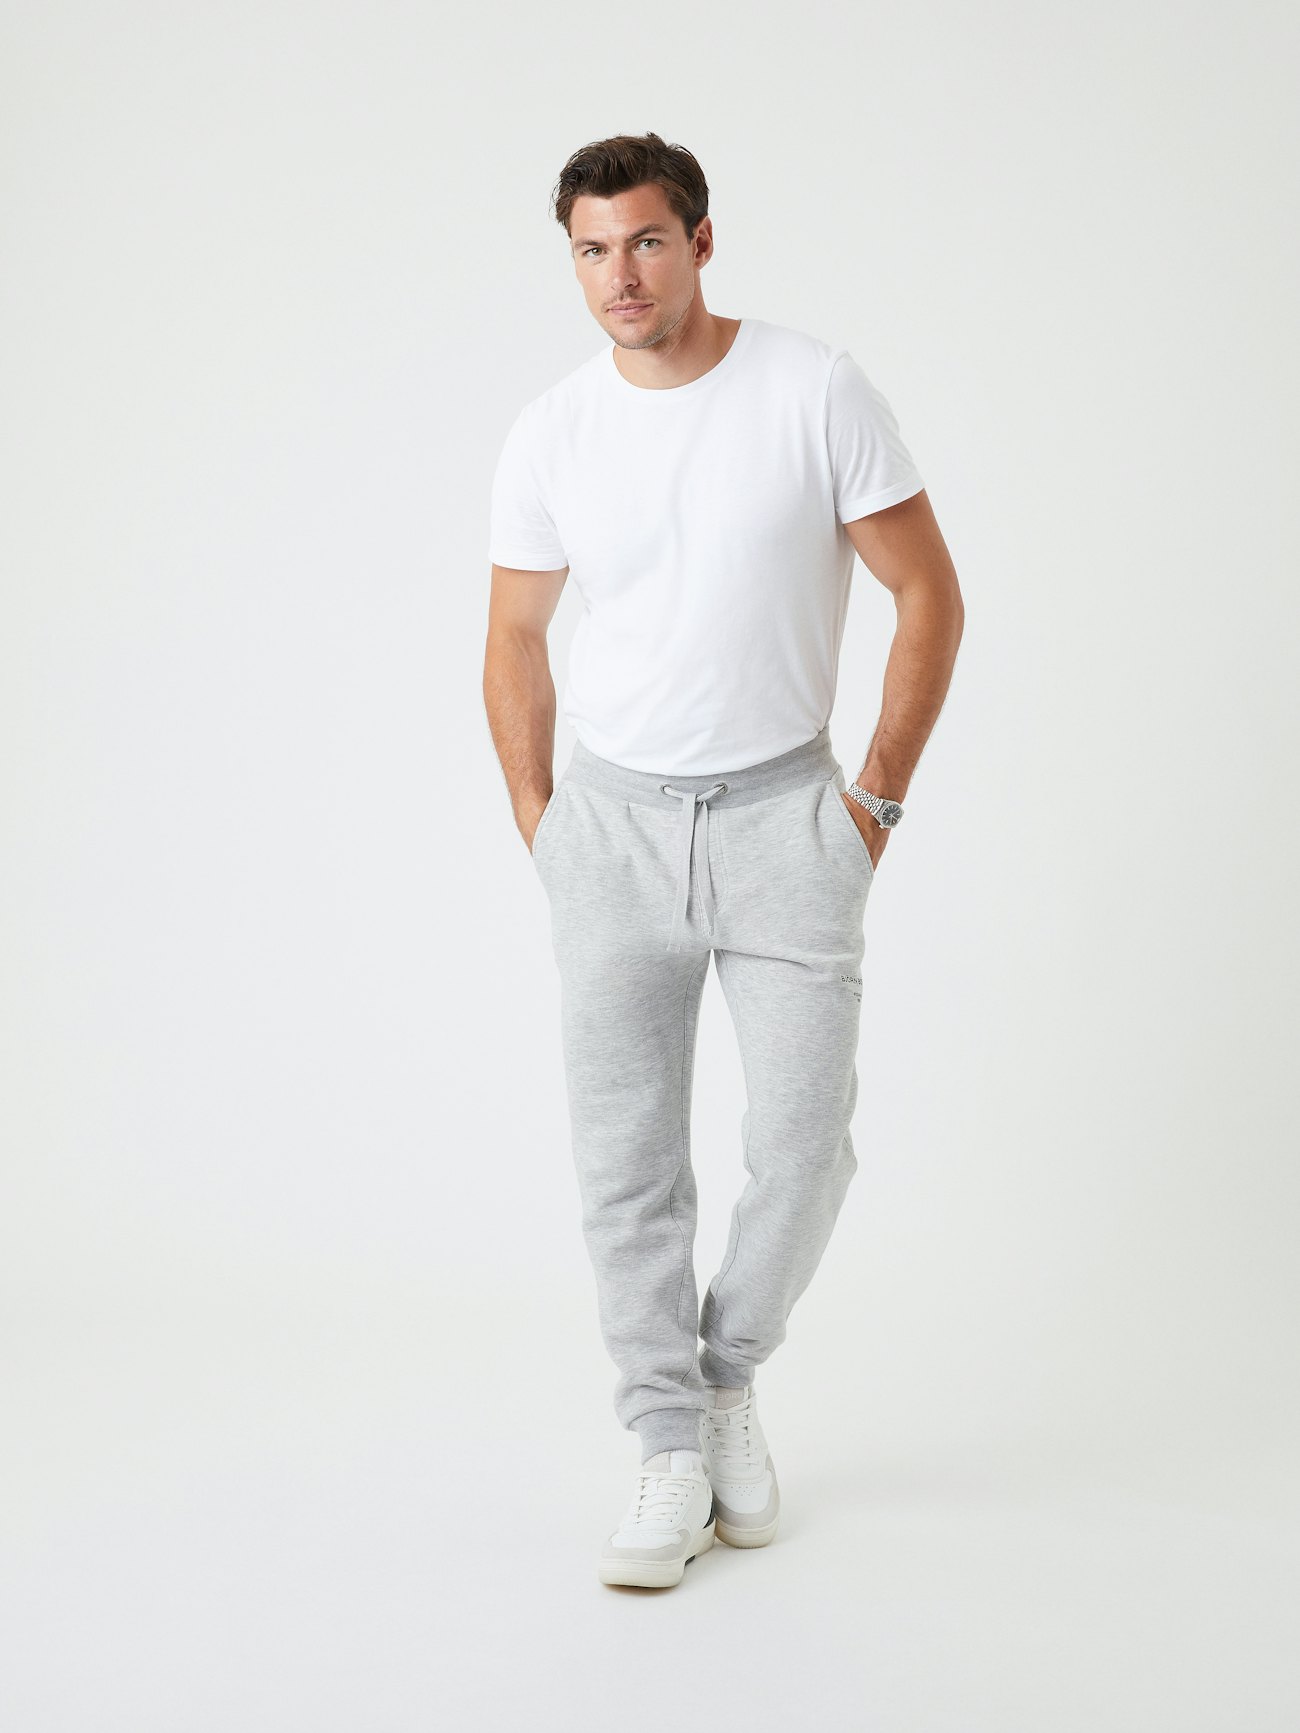 Buzz Physique Crest Joggers - Navy  Best Price in 2024 at Buzz Physique